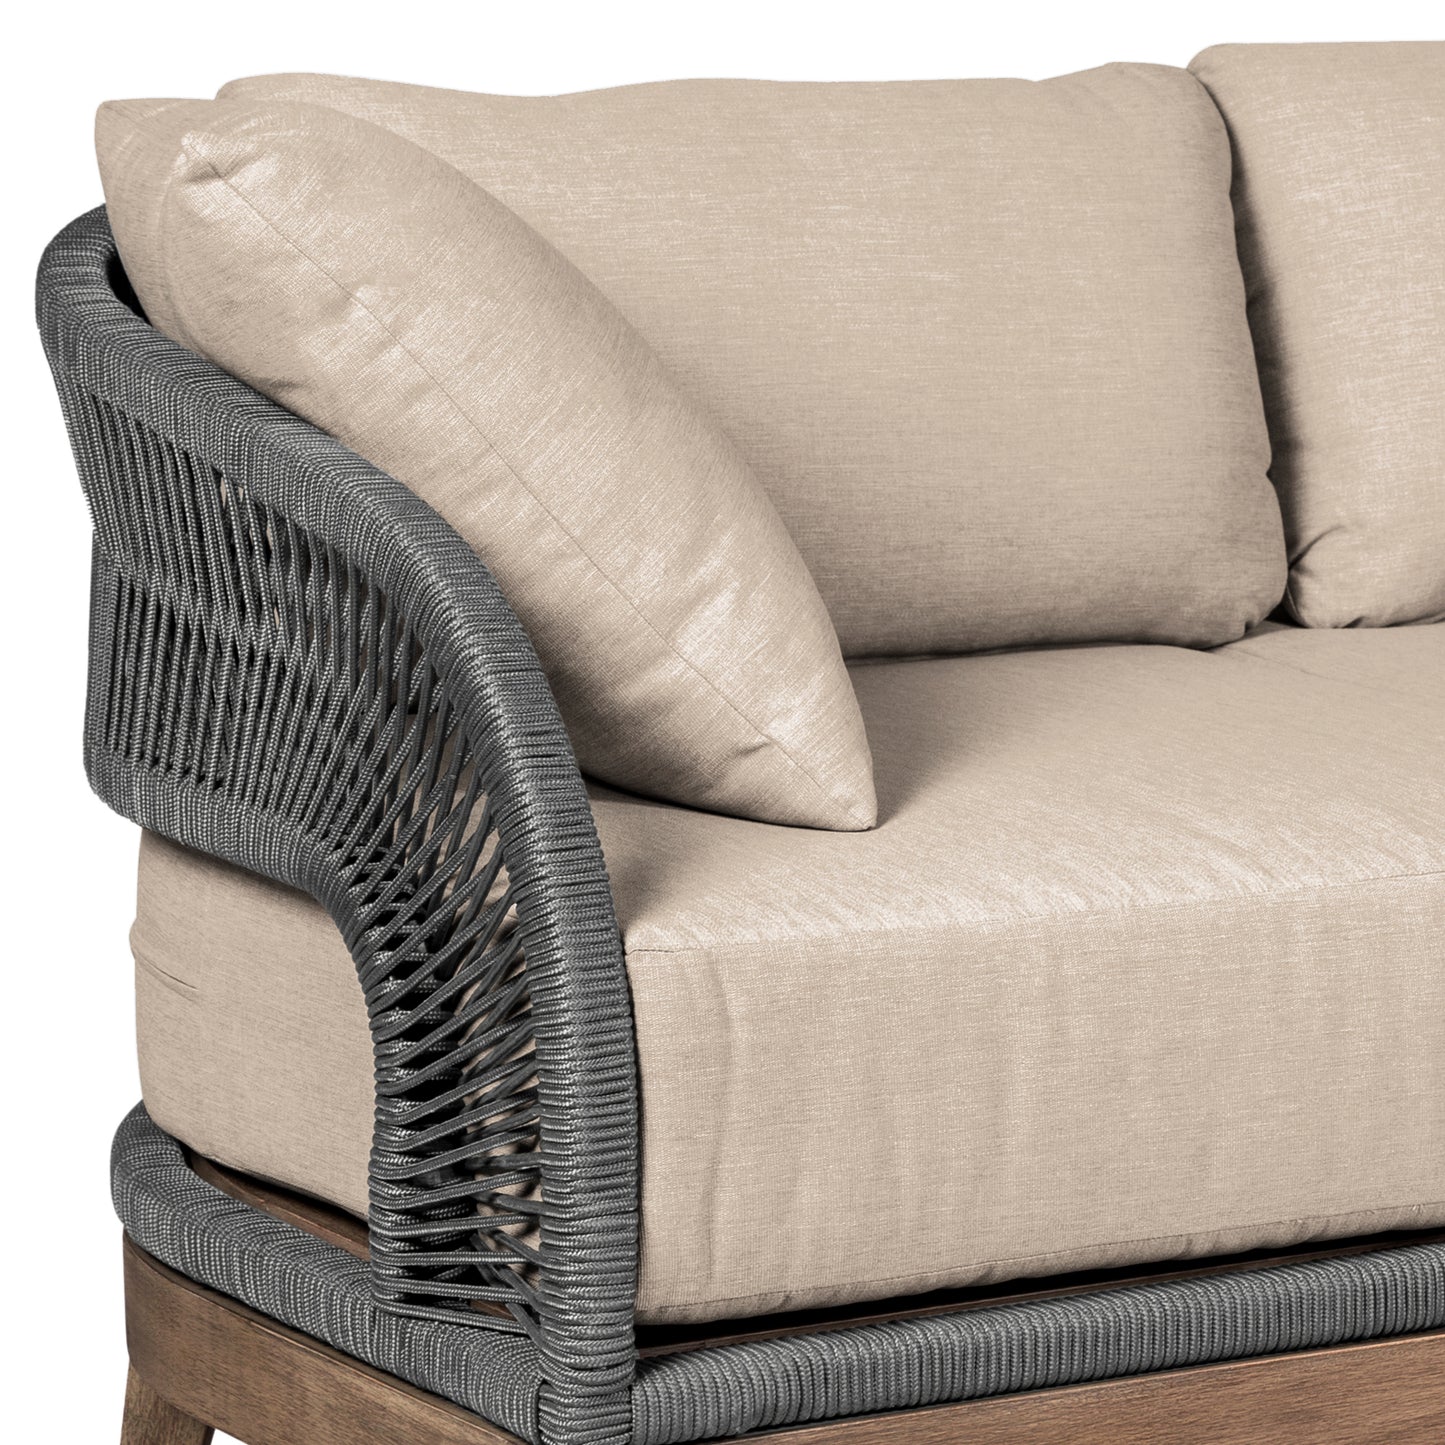 Orbit Outdoor Patio Sofa in Weathered Eucalyptus Wood with Gray Rope and Taupe Olefin Cushions